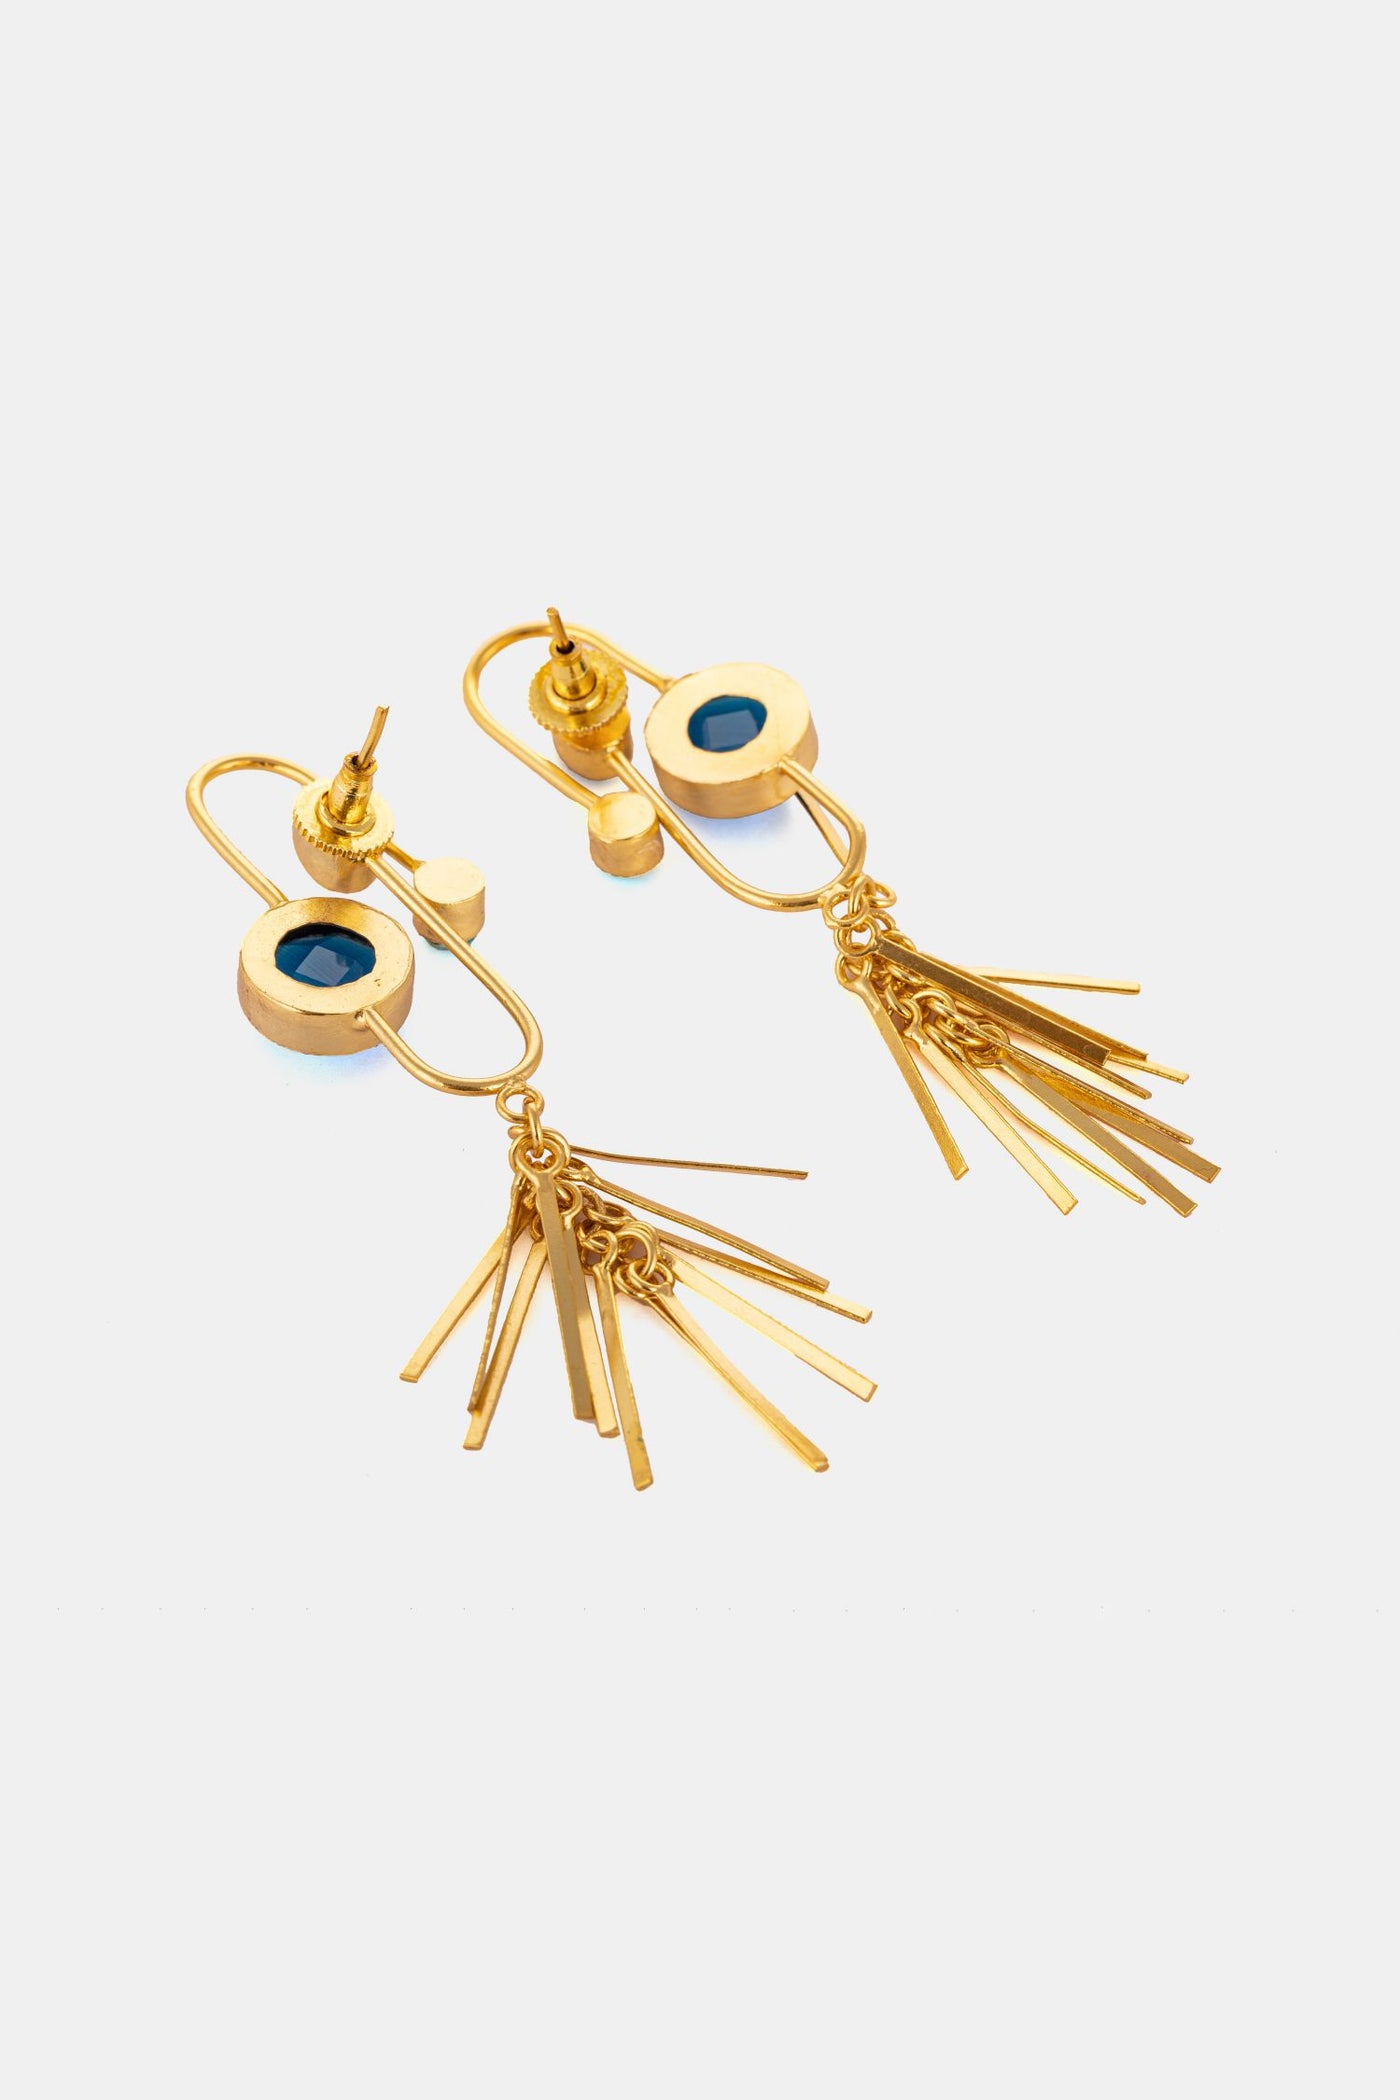 Hues Of Blue With Golden Colour Earrings